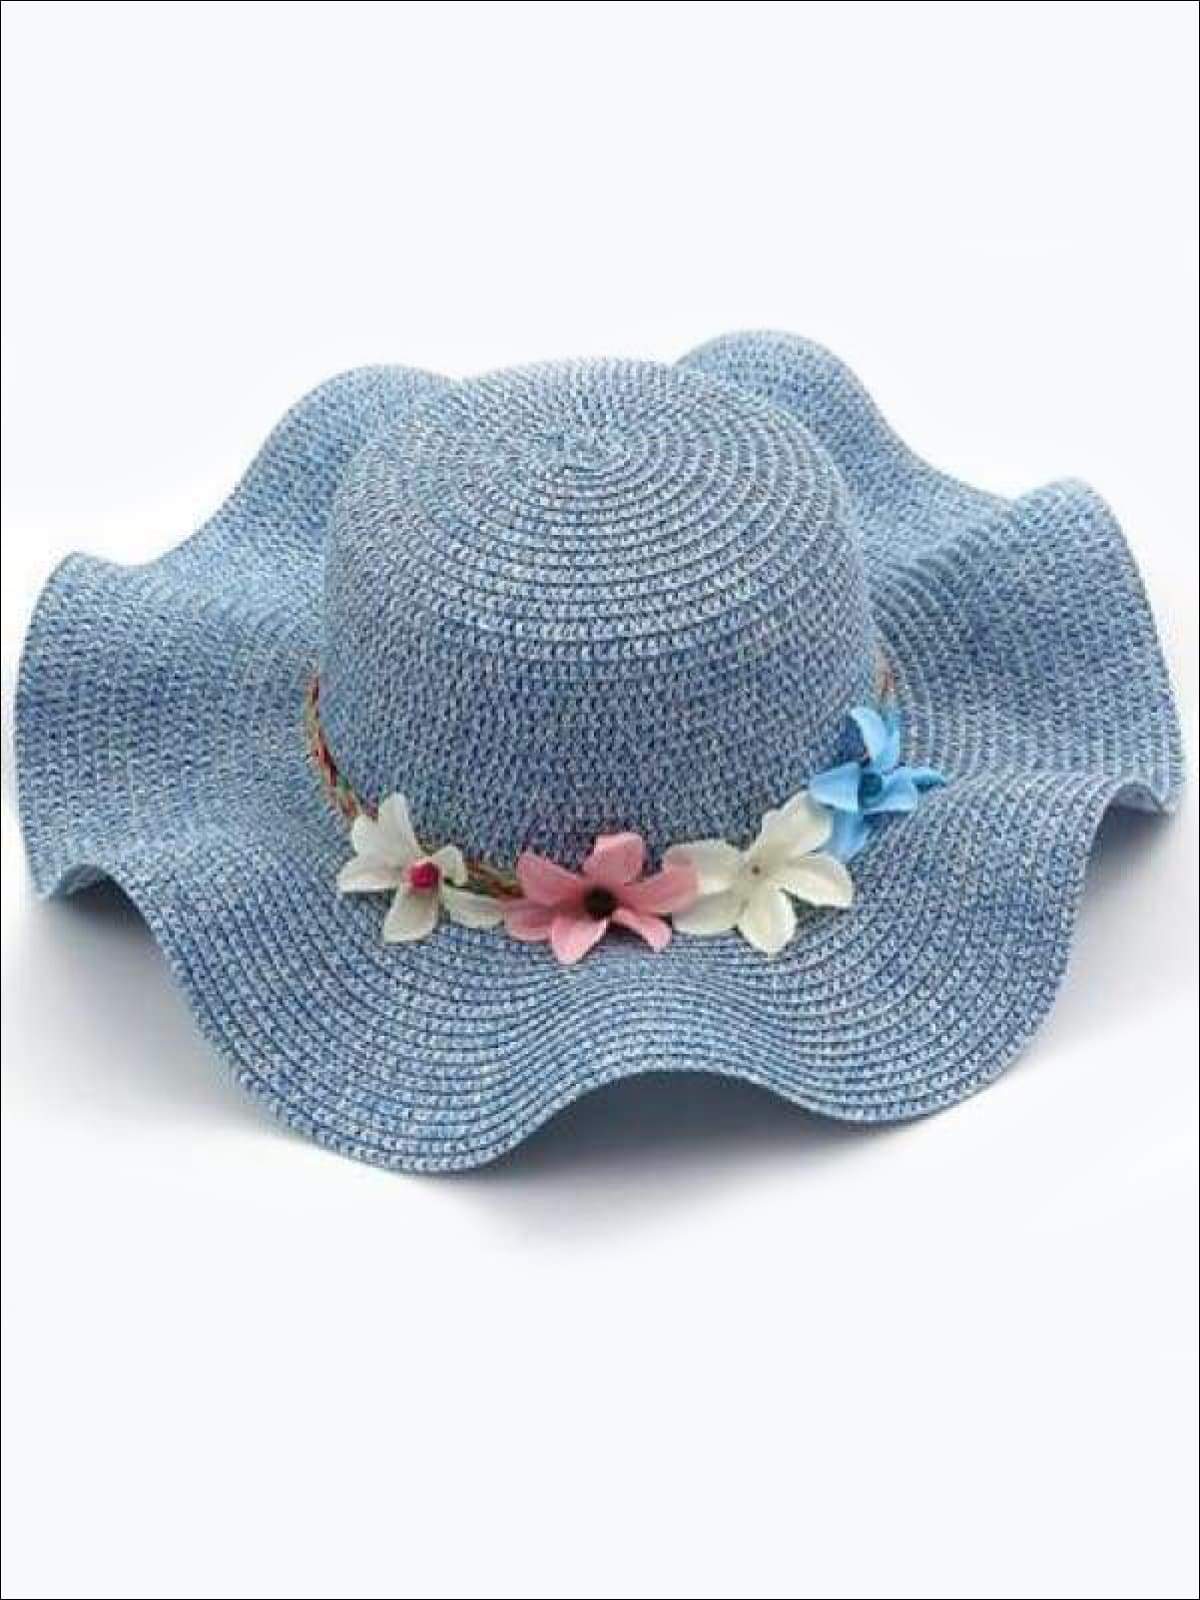 Girls Fashion Straw Hat with Flowers ( 5 colors) - Dark Blue / S - Hats & Caps